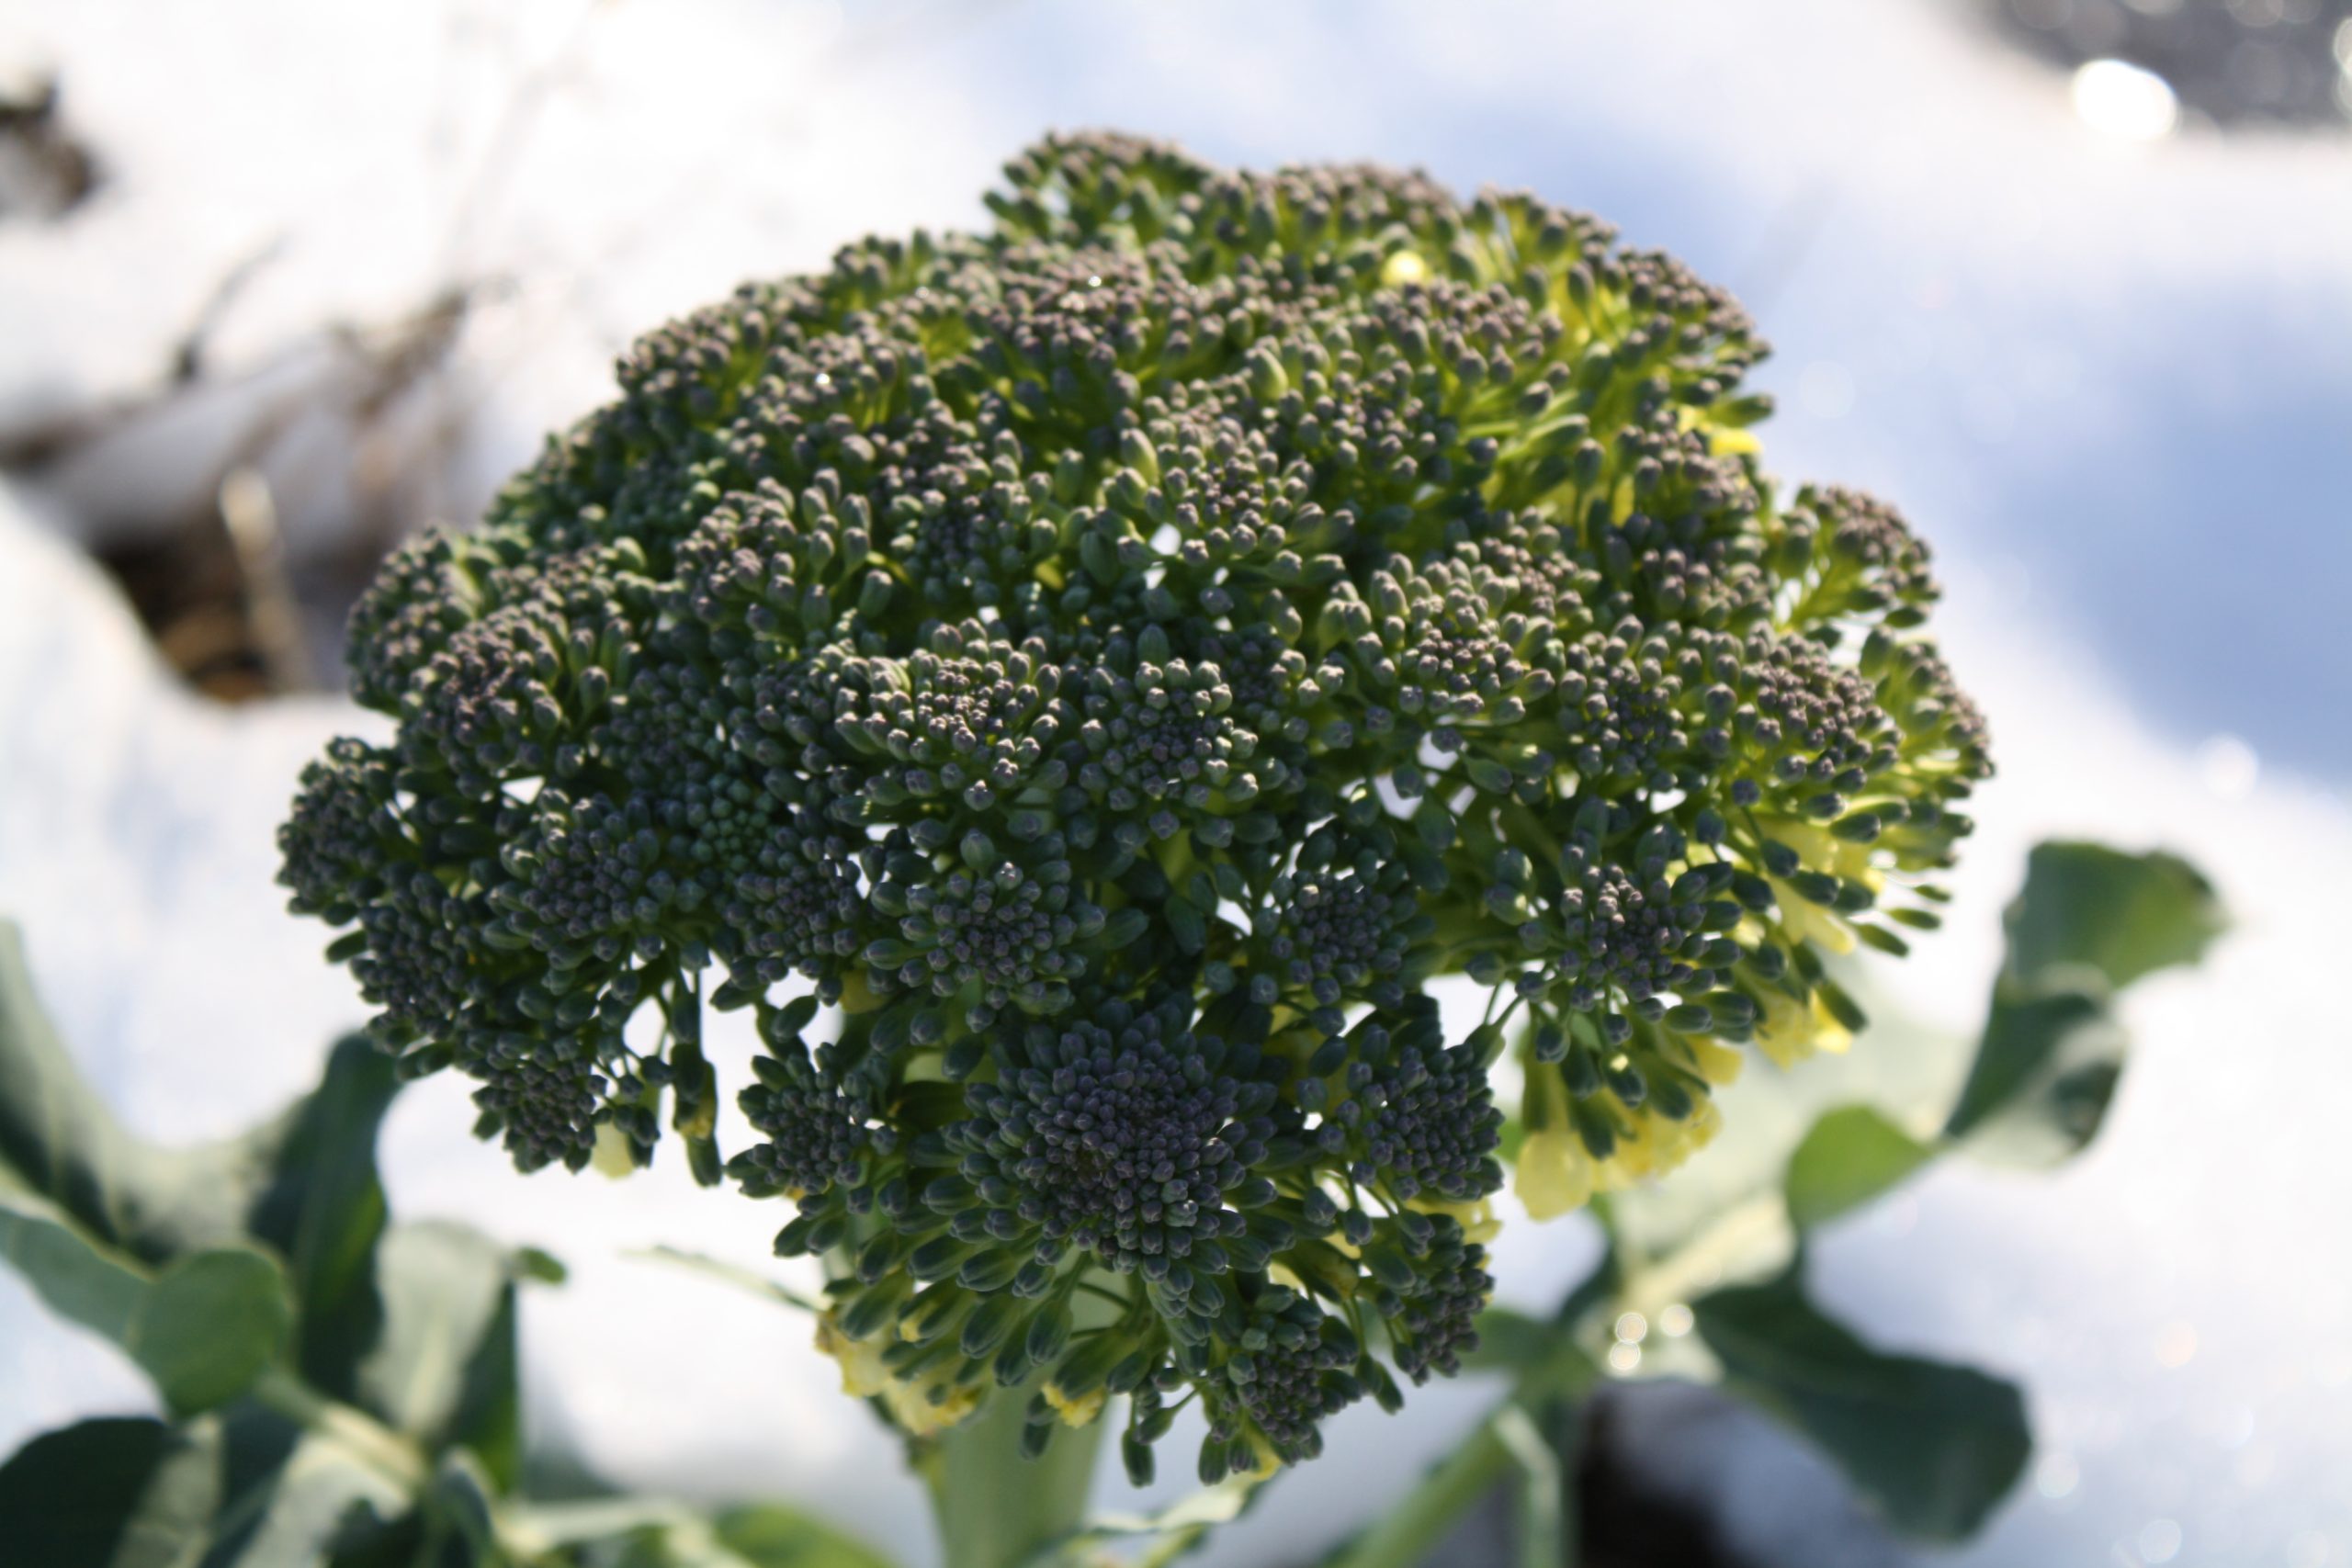 Snow Broccolli (user submitted)